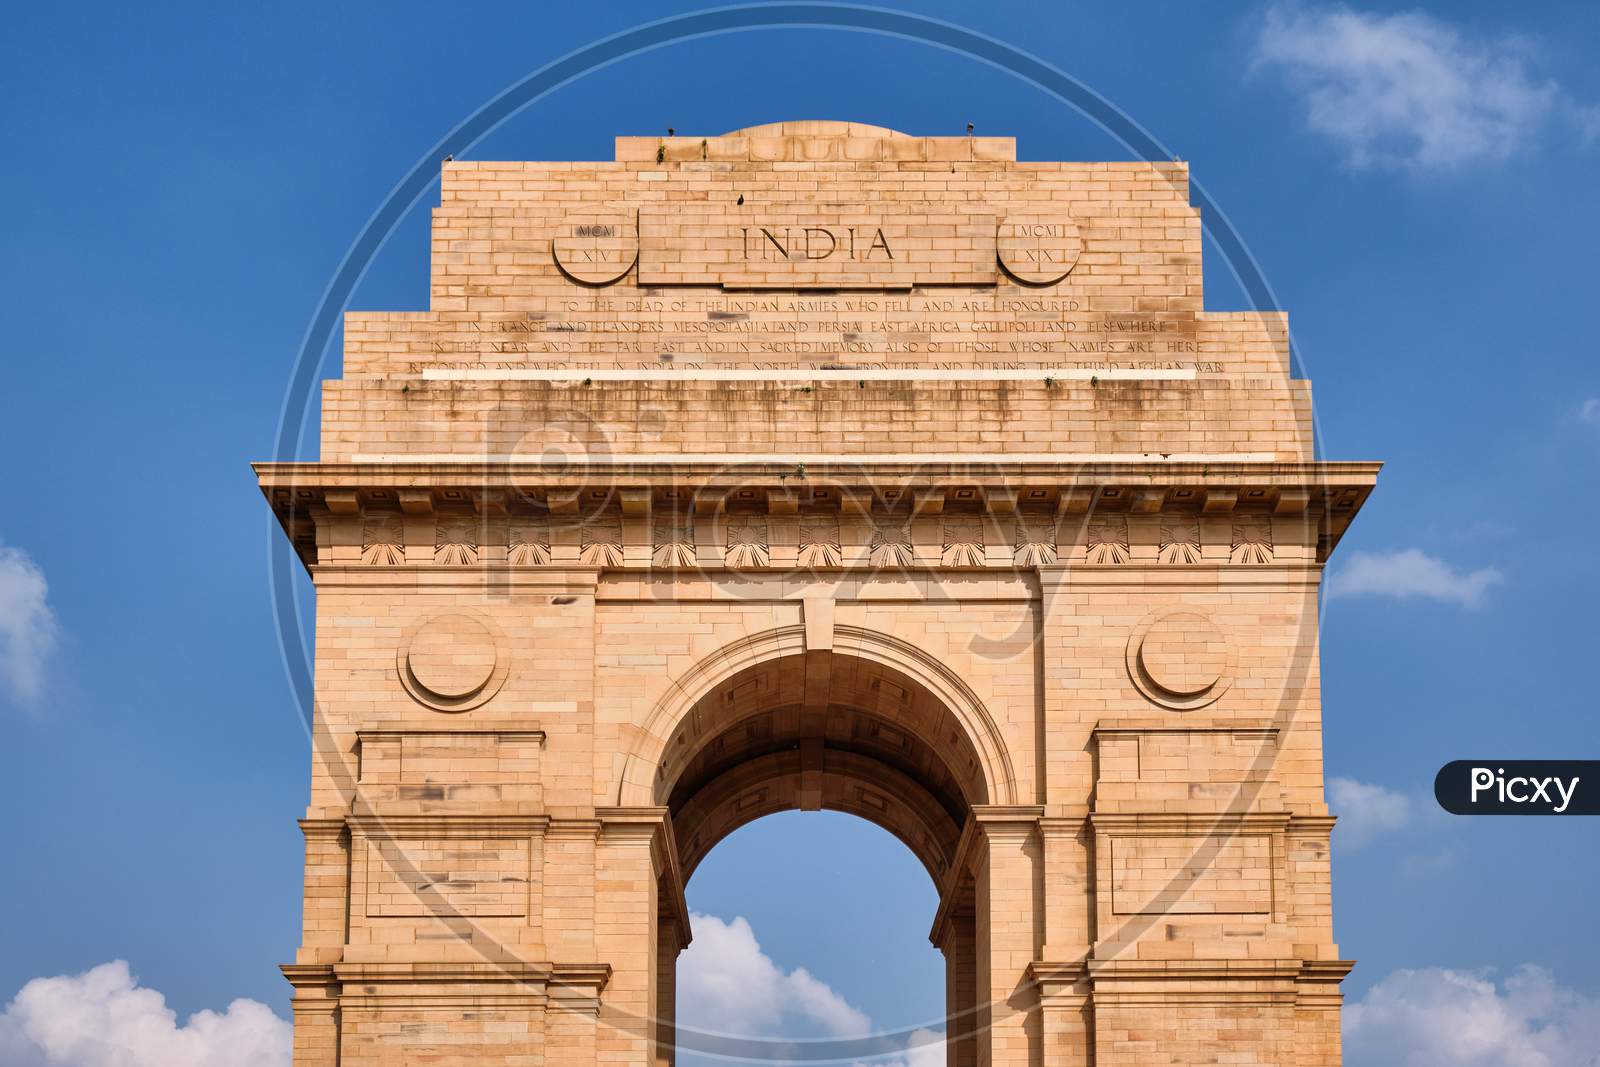 The India Gate War Memorial In New Delhi, India, Dedicated To 70,000 Soldiers Of The British Indian Army Killed In Wars Between 1914 And 1921